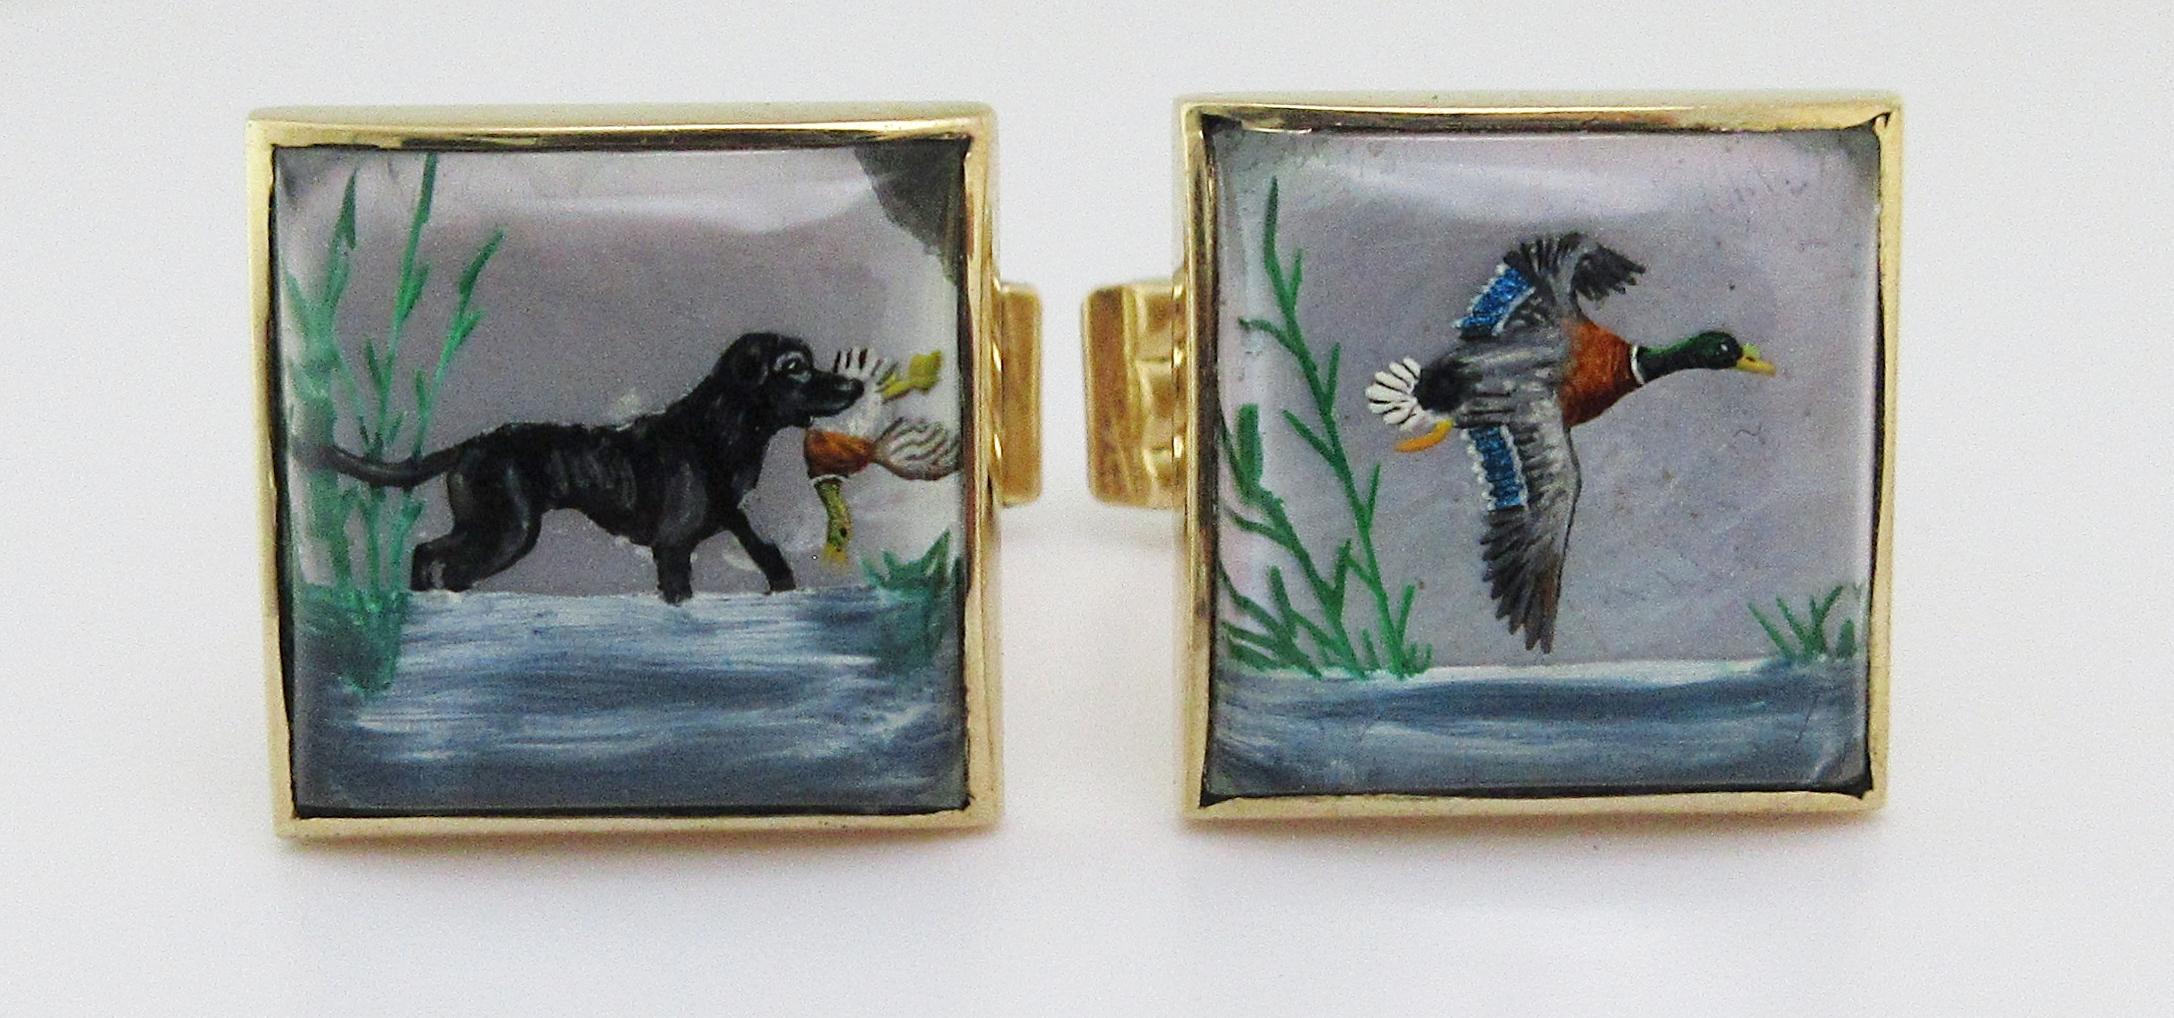 These spectacular examples of the finest of detailed work, composed of
two square hand carved rock crystal quartz reverse intaglio, each hand
painted in polychrome colors; one of a black labrador retriever in water
retrieving a duck; the other of a